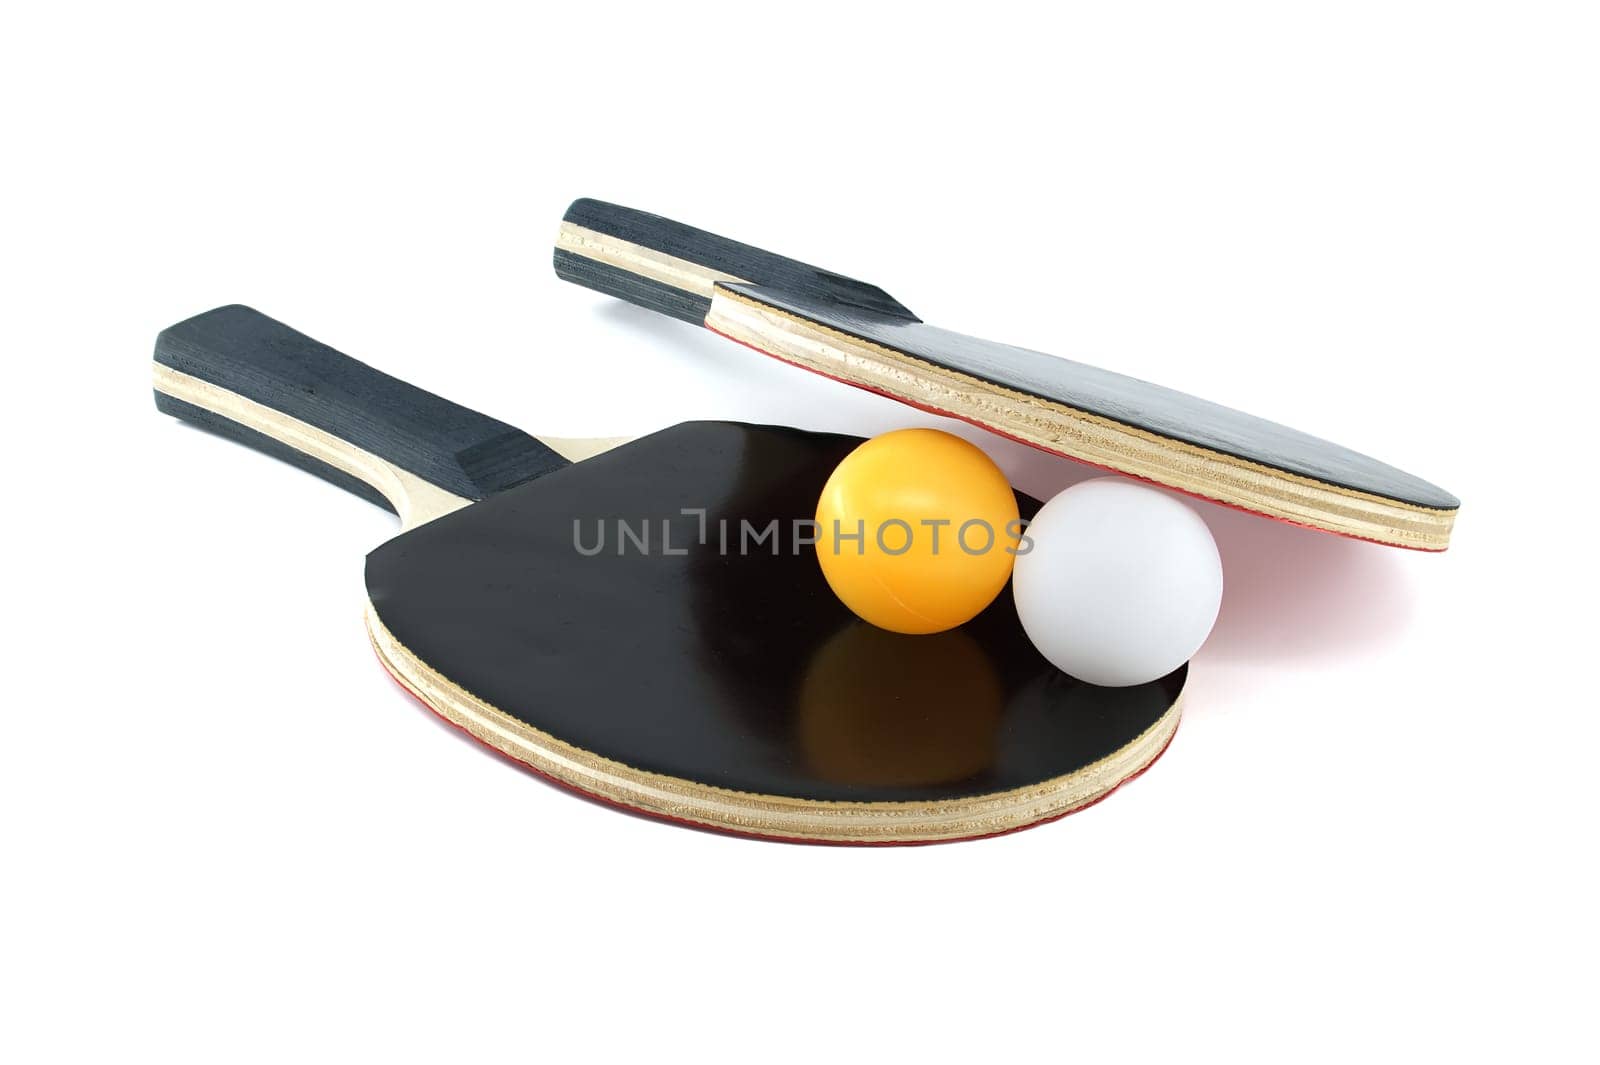 Isolated on a white background are two ping pong paddles and a ping pong ball, with one racket's surface appearing in red and the other in black